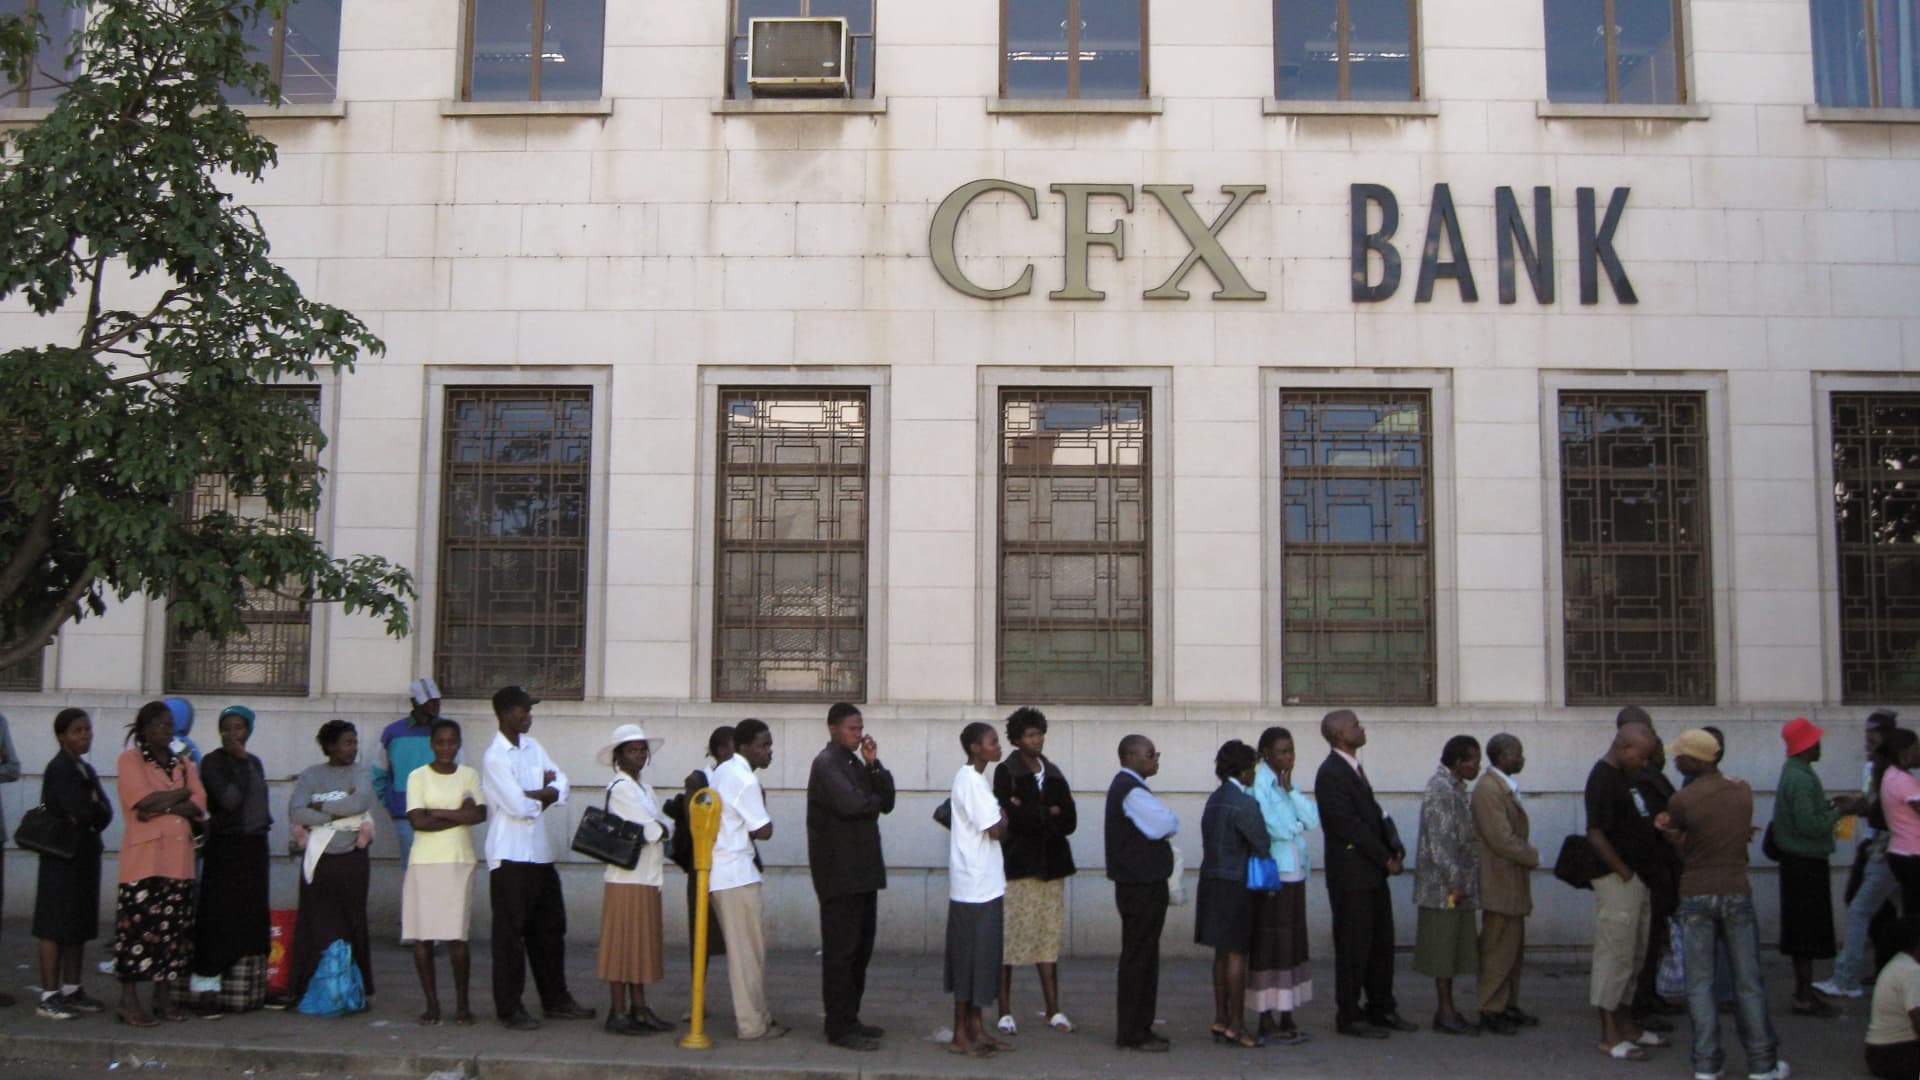 Zimbabweans queue to withdraw money from a bank on June 21, 2008 in Bulawayo, Zimbabwe.